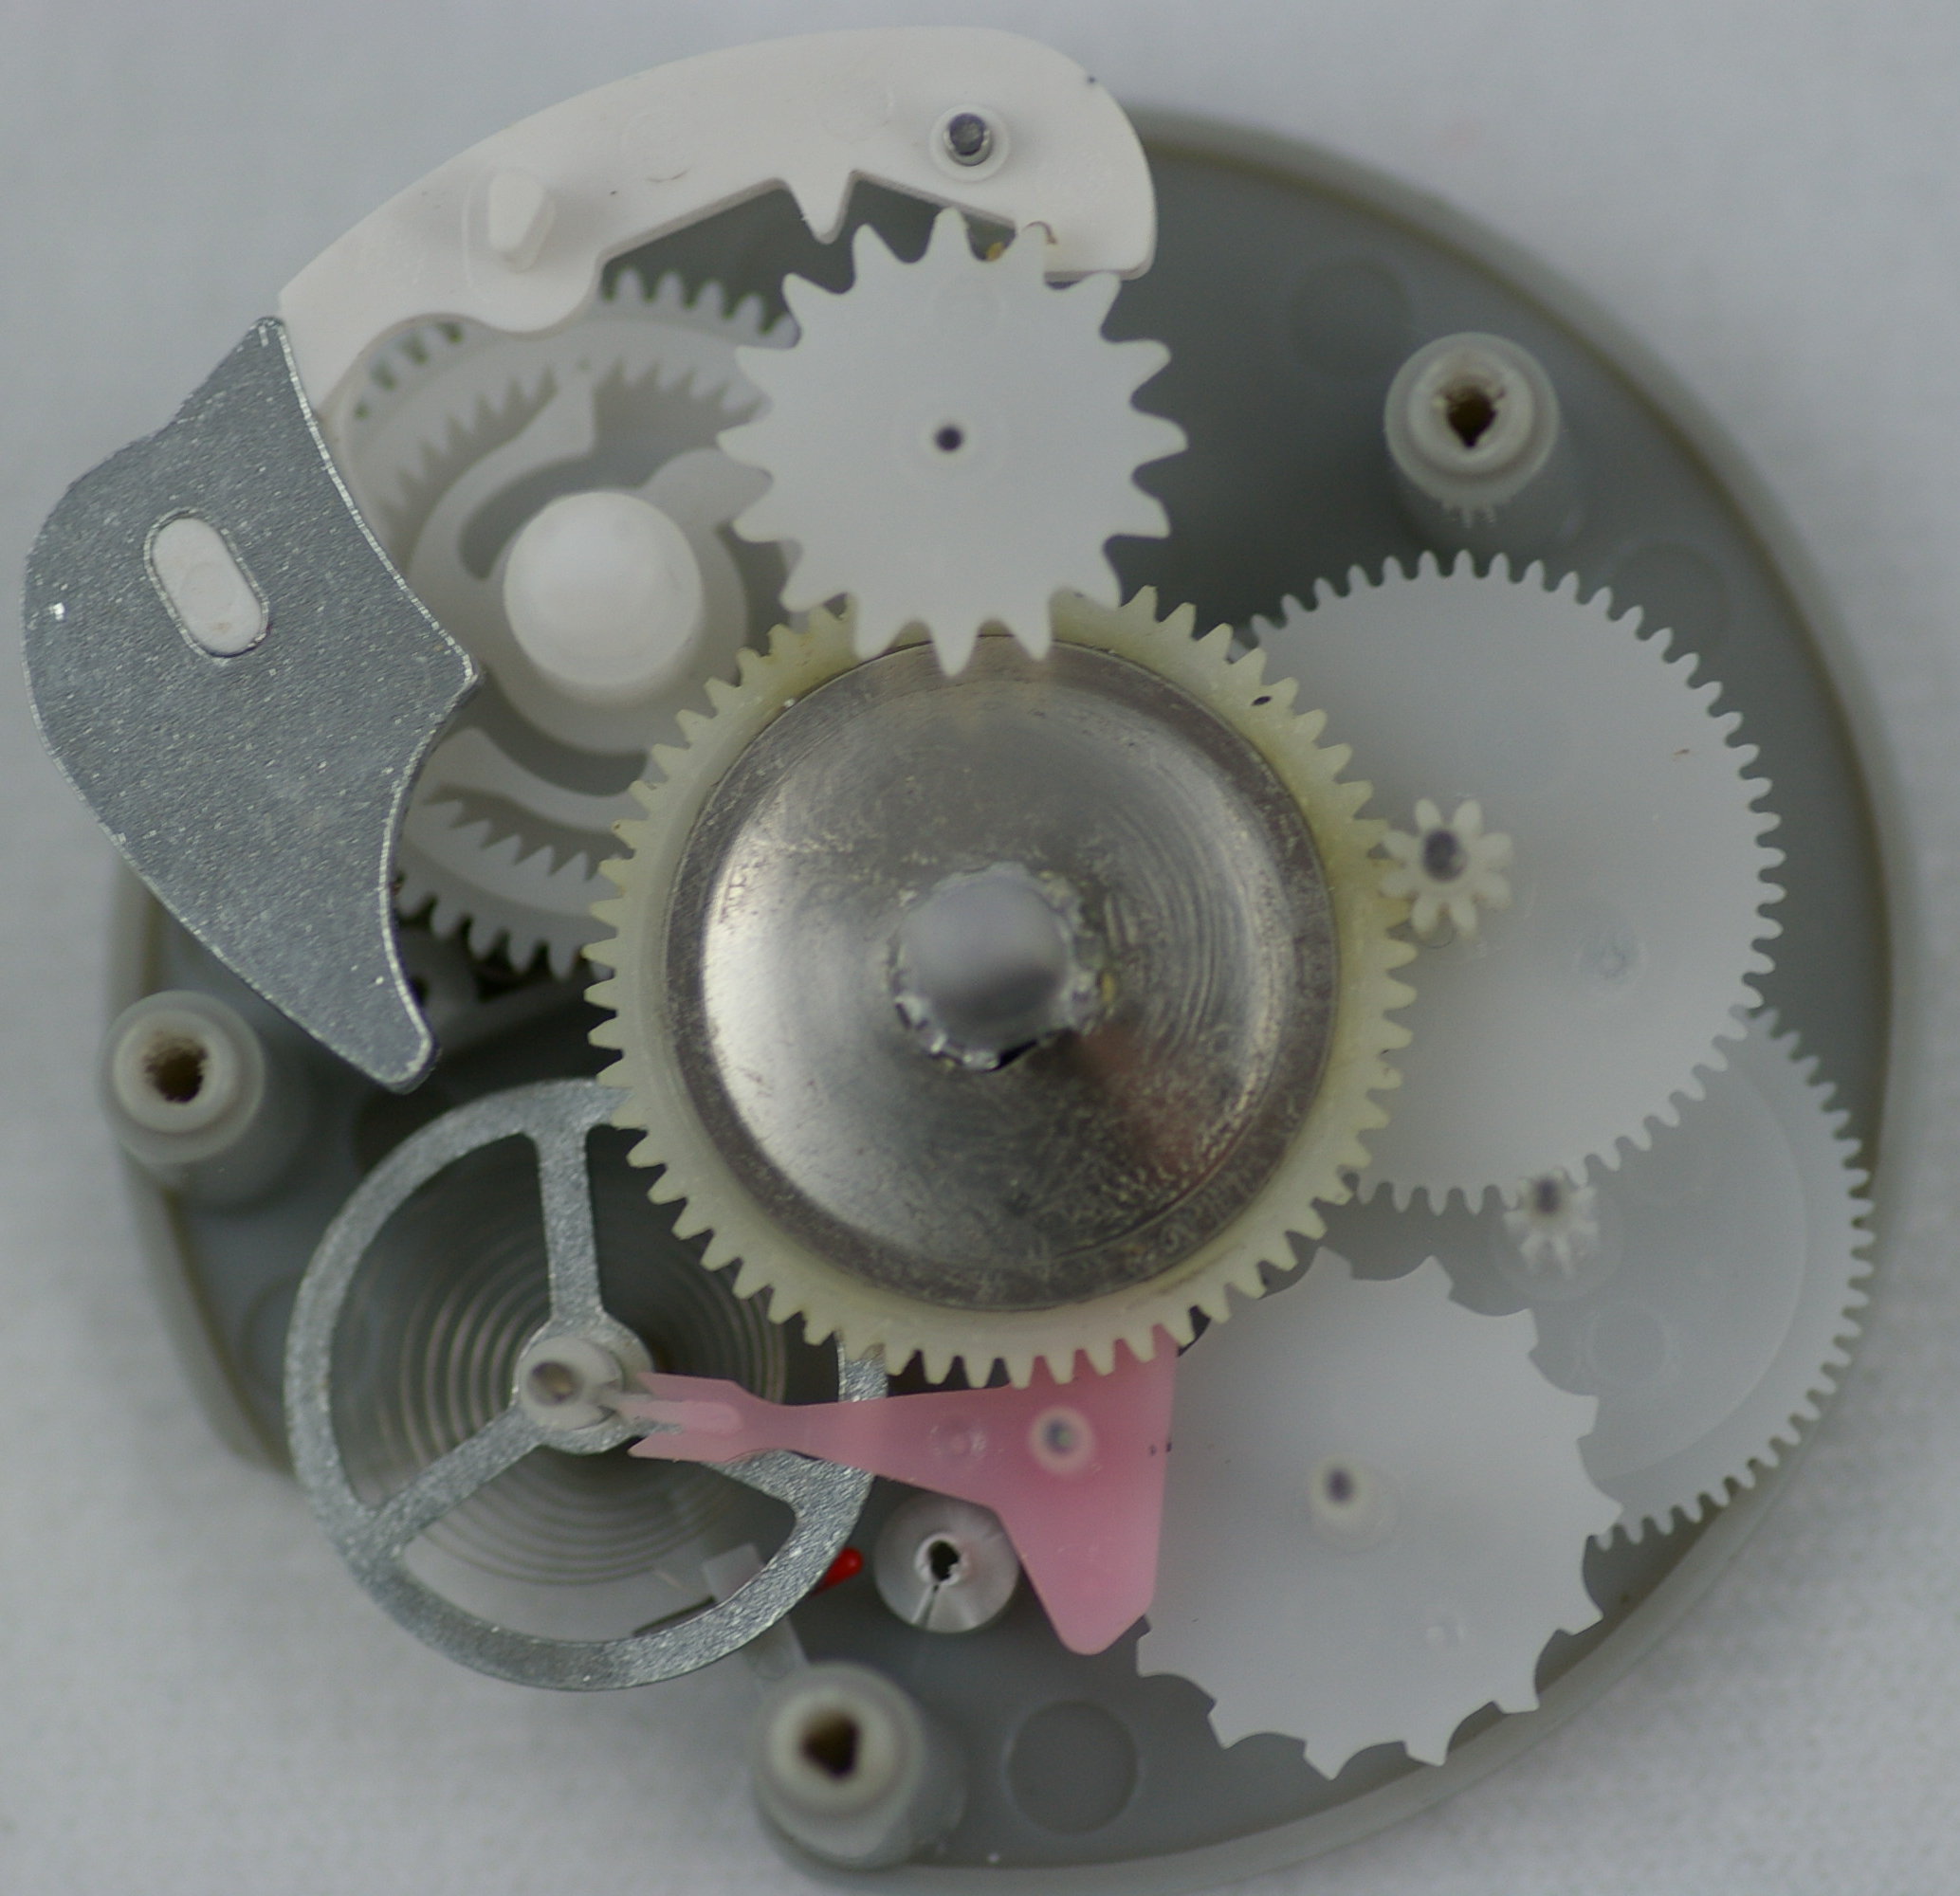 The gears from an egg timer, showing the Lever escapement and other gears.